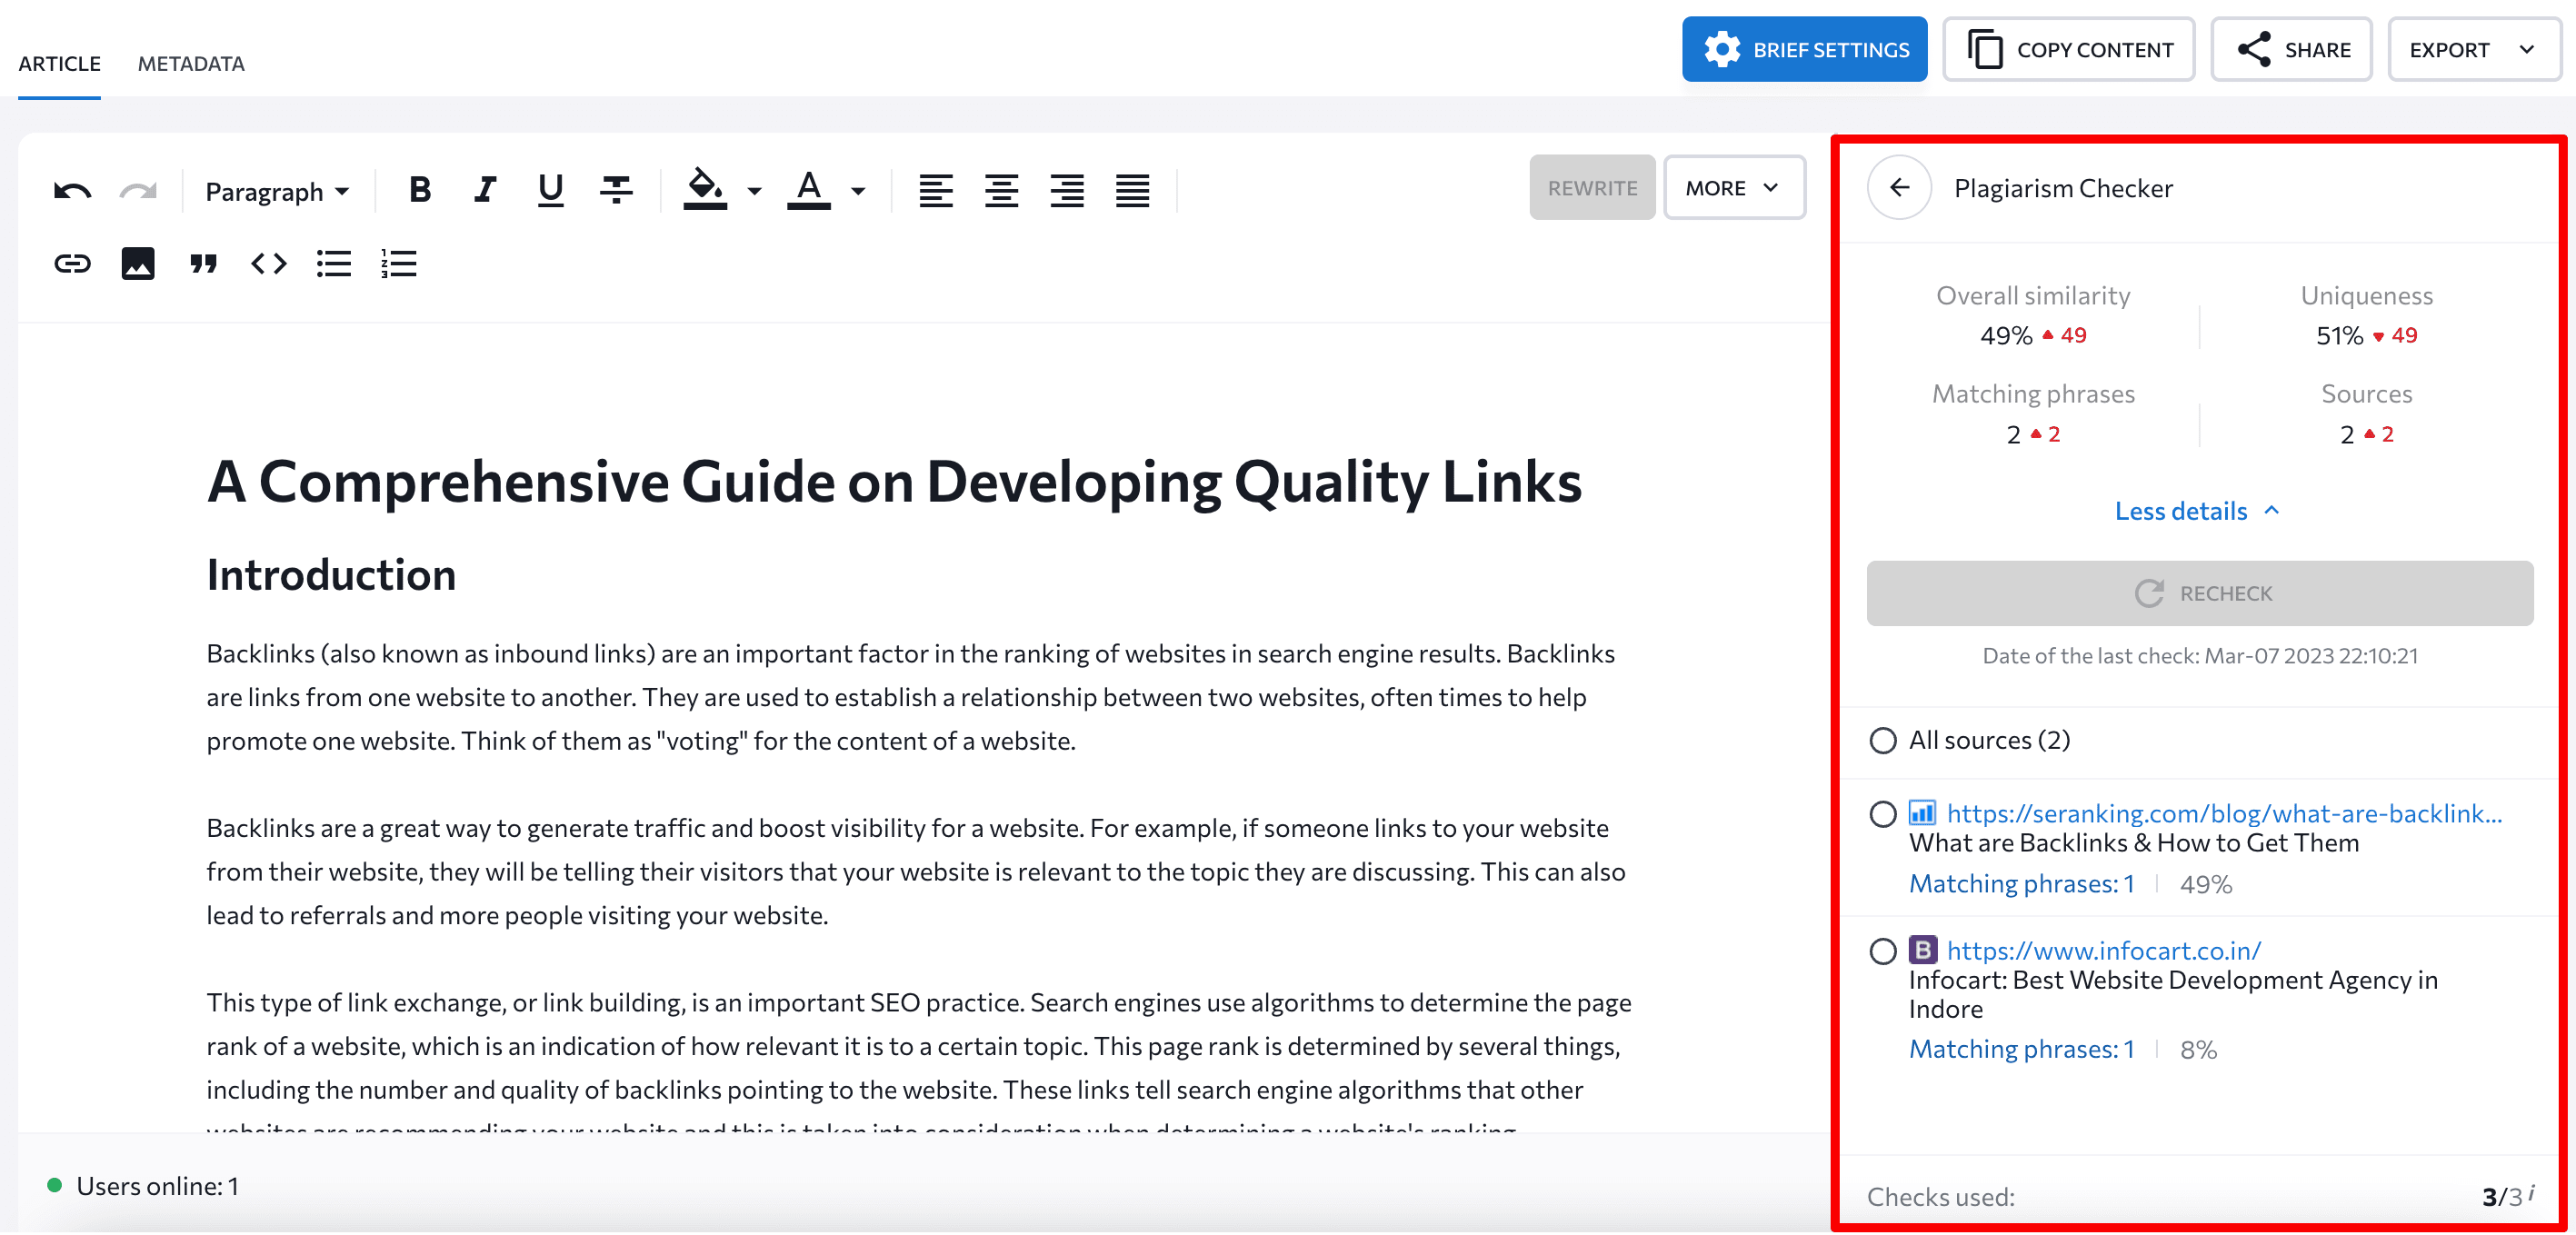 Plagiarism Checker feature in SE Ranking's Content Editor